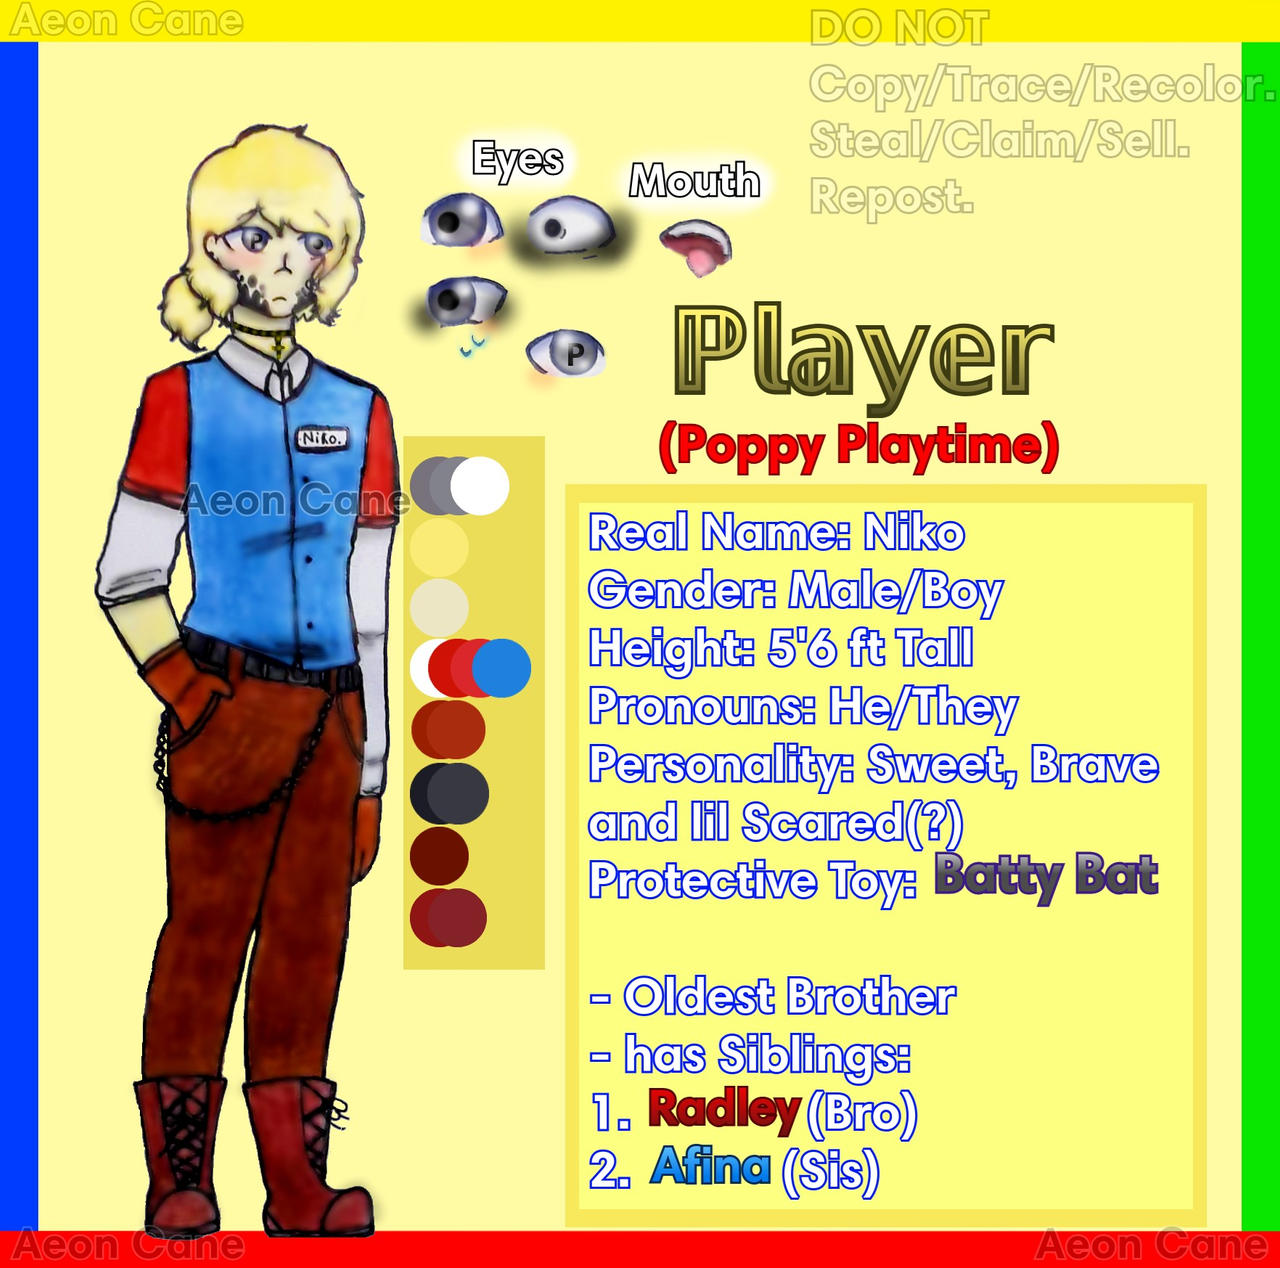 Poppy Playtime: Player (Niko) (Official Looks) by AeonCane on